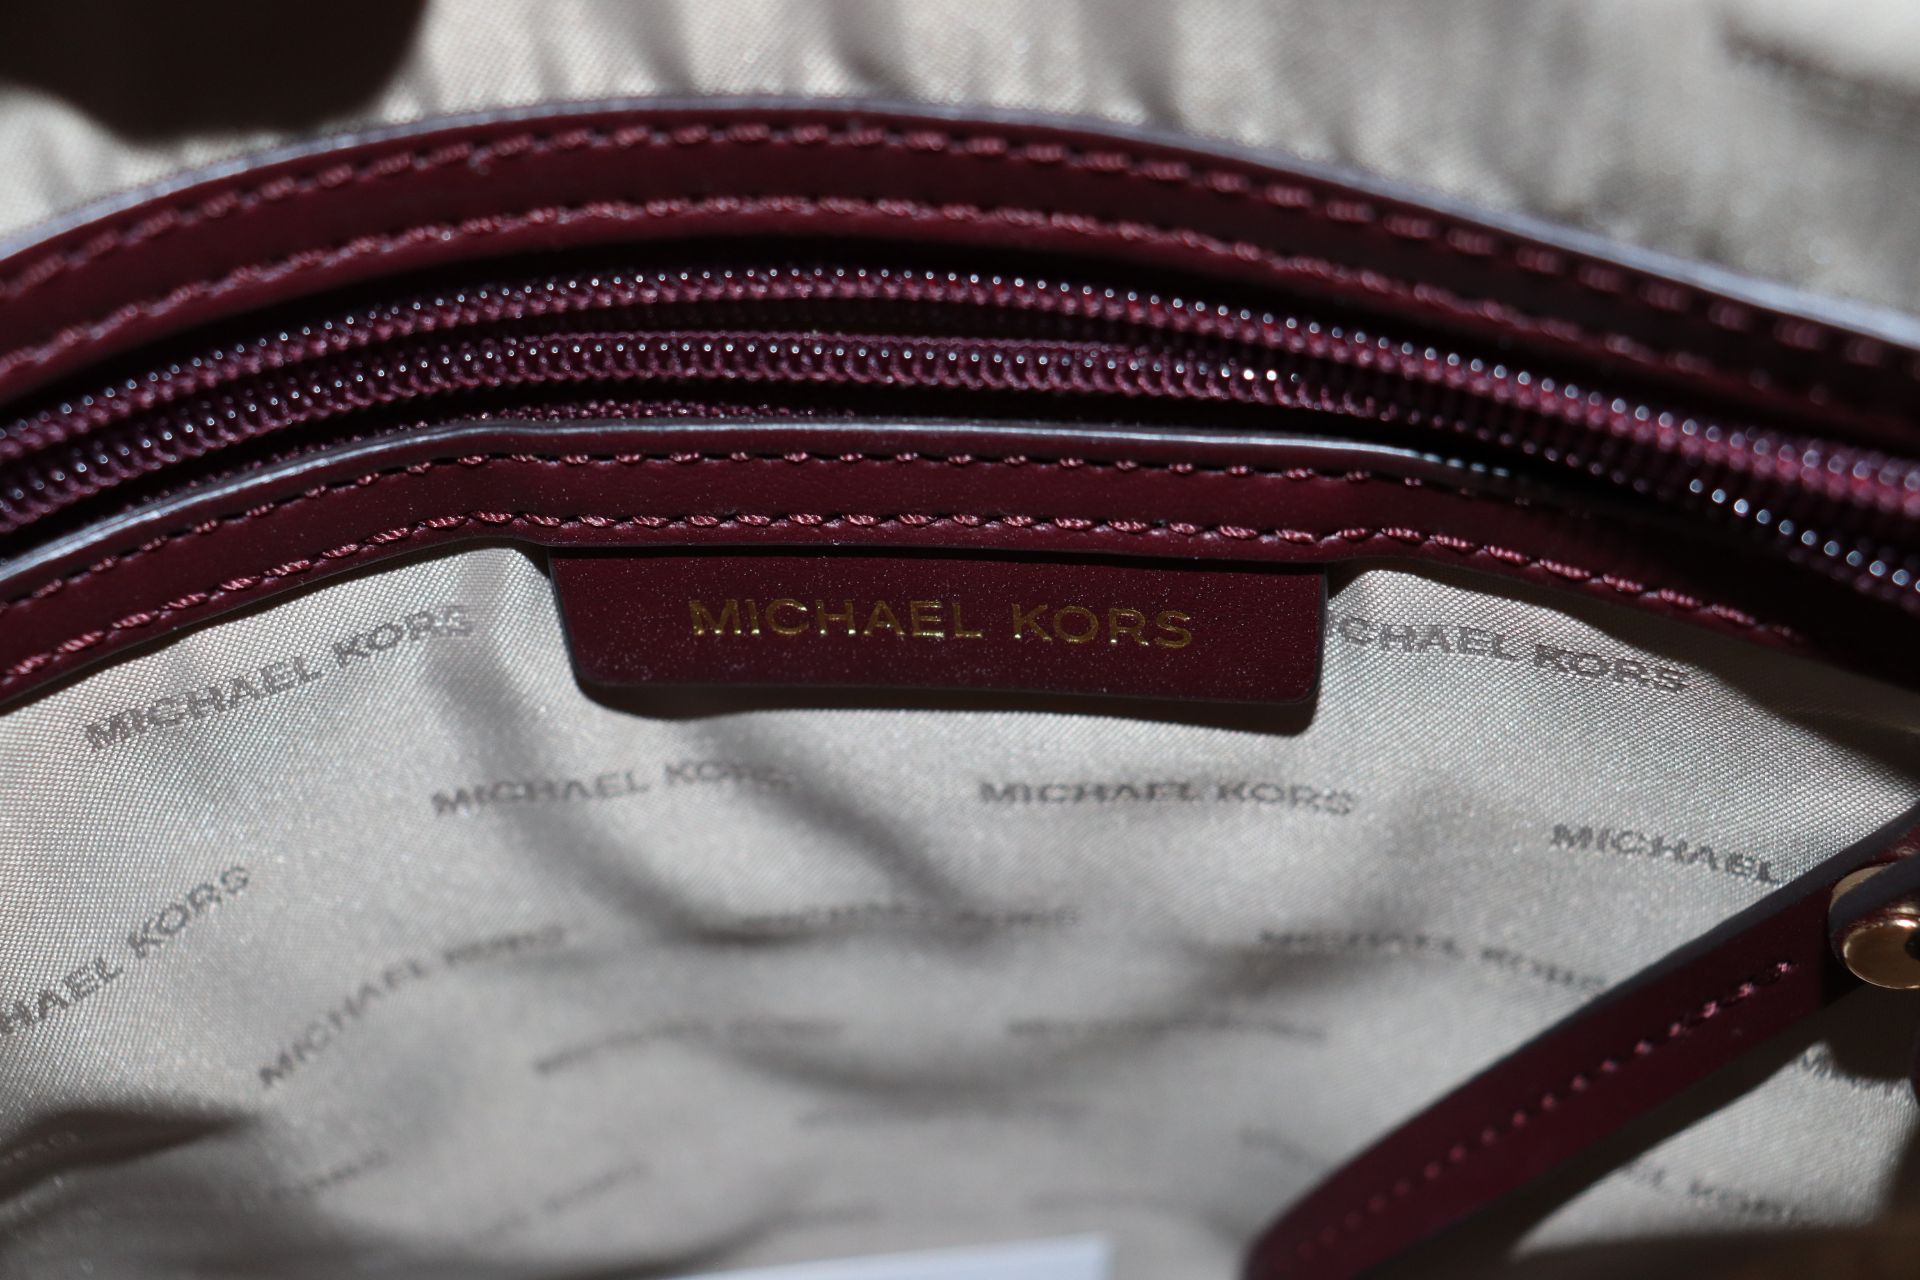 A Michael Kors wine coloured bag and purse - Image 5 of 6